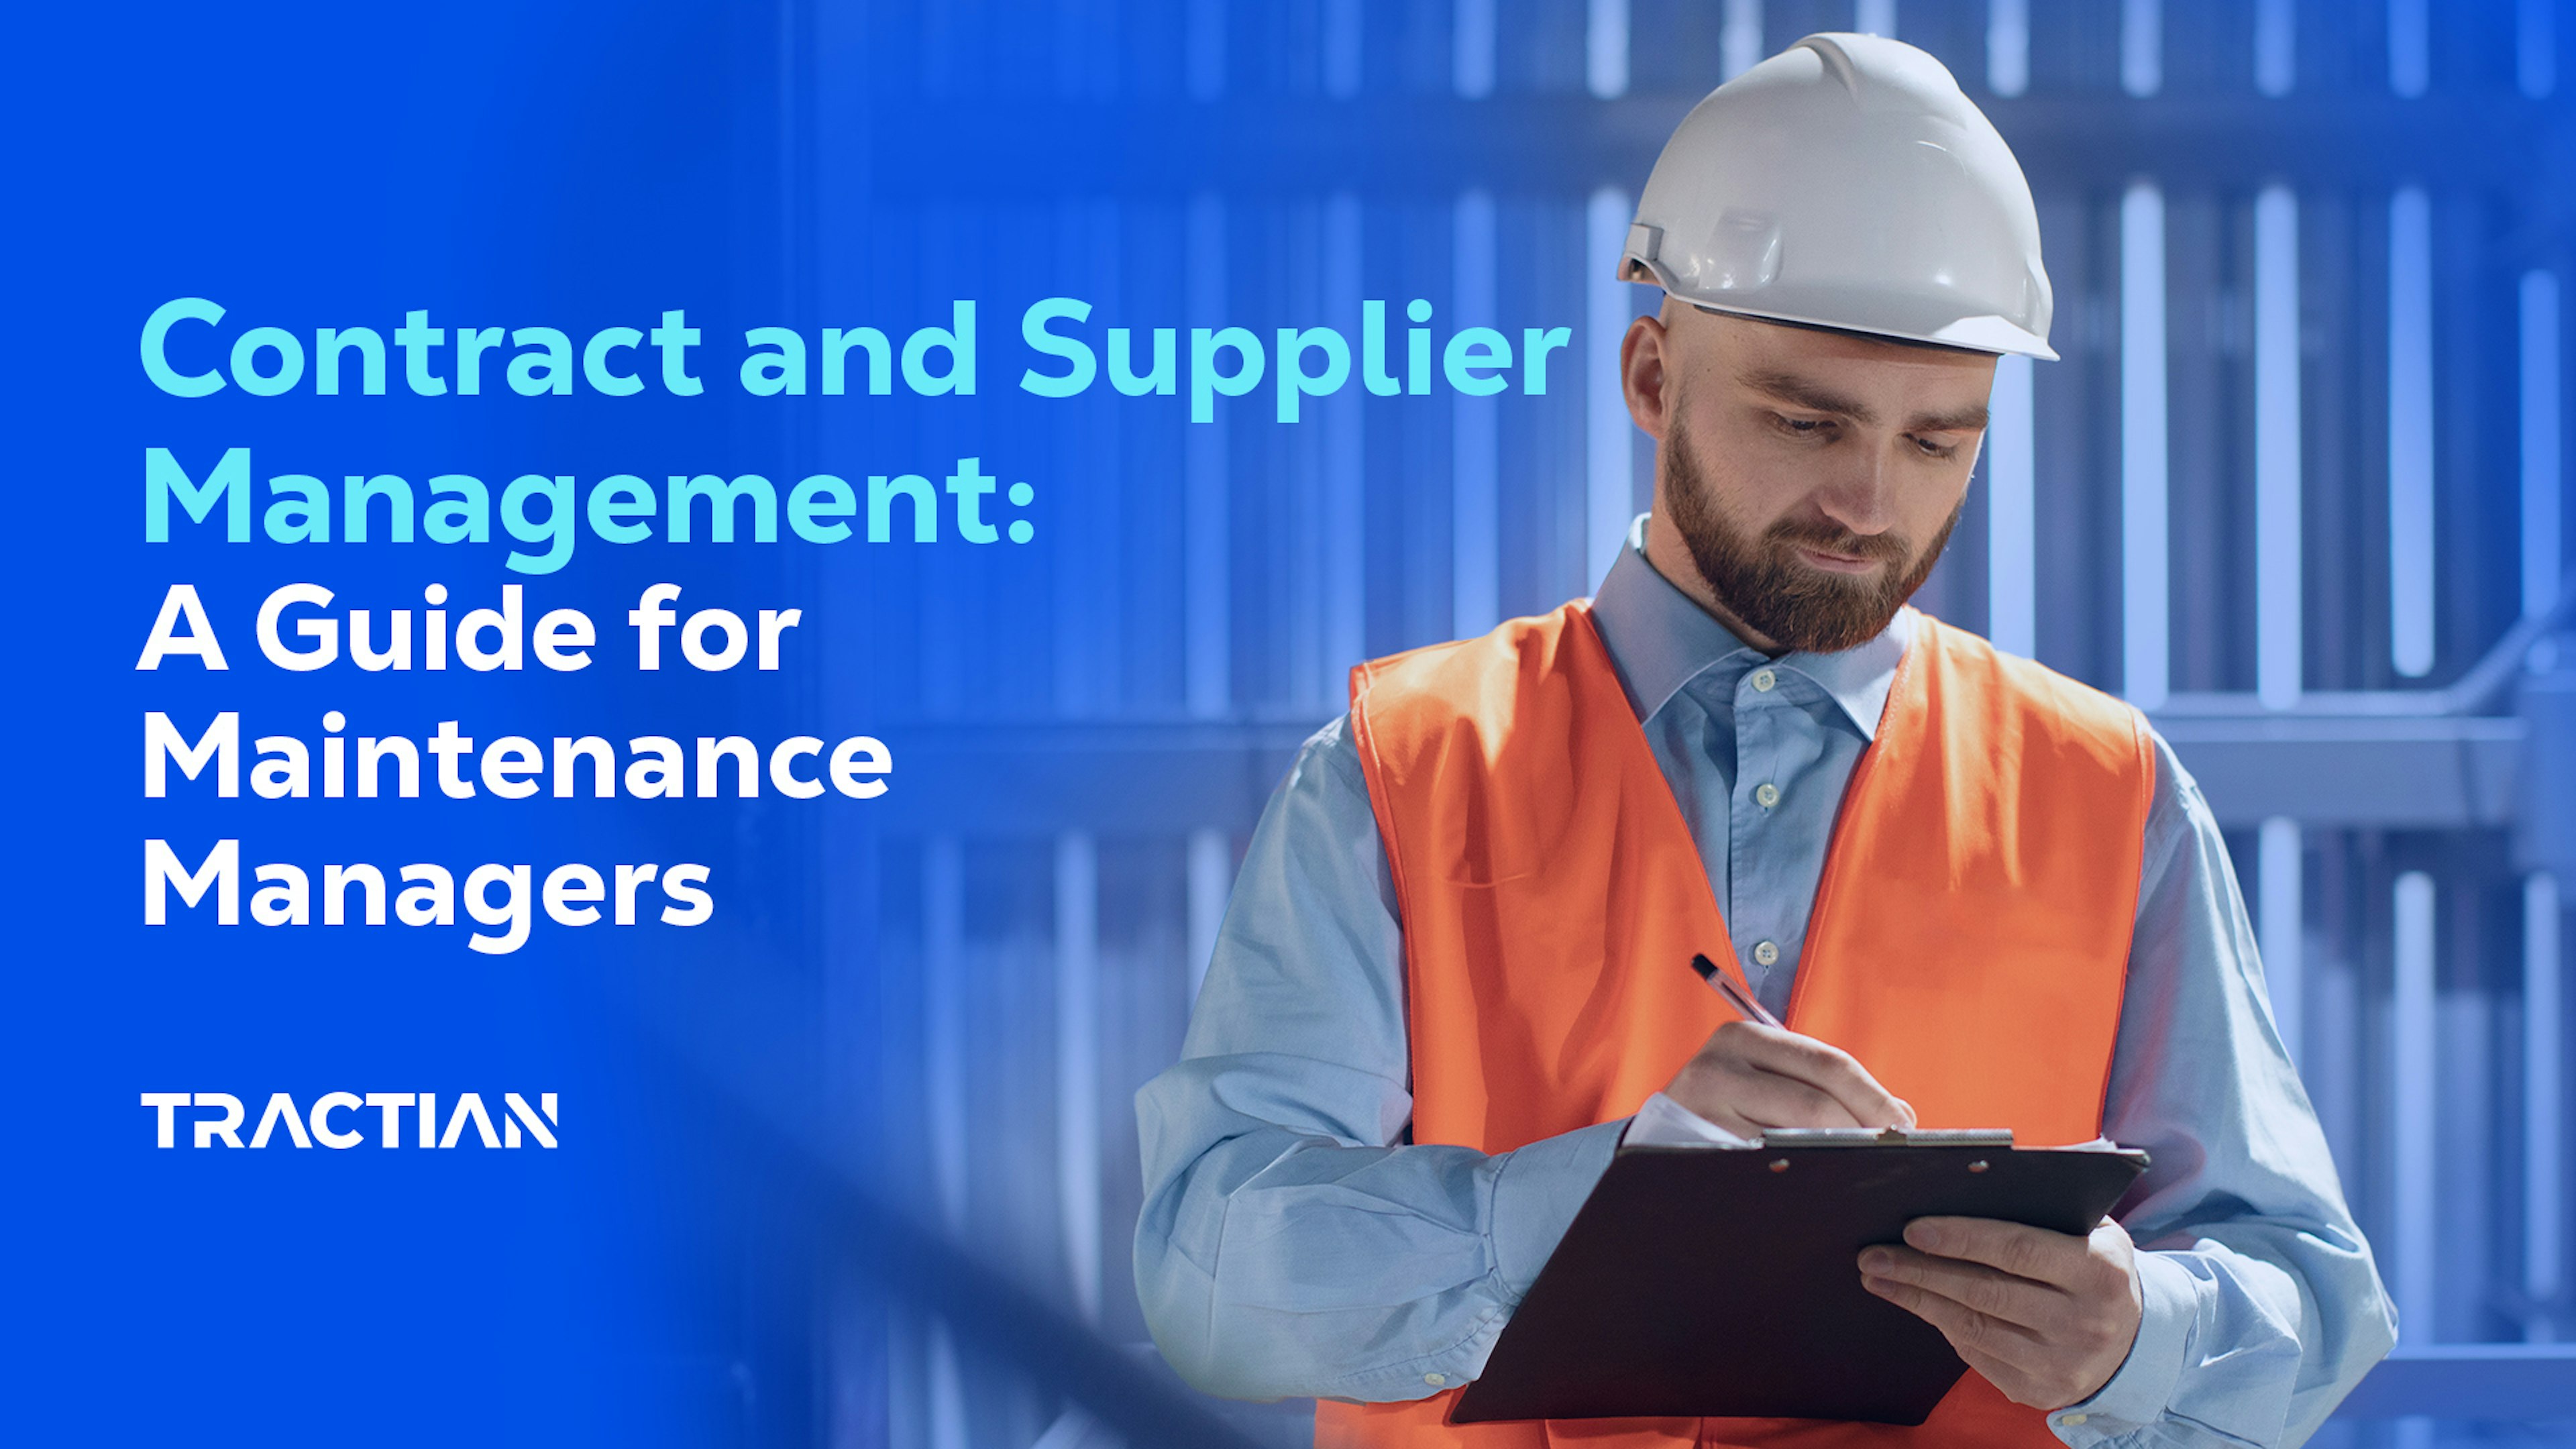 Contract and Supplier Management: Guide for Maintenance Managers